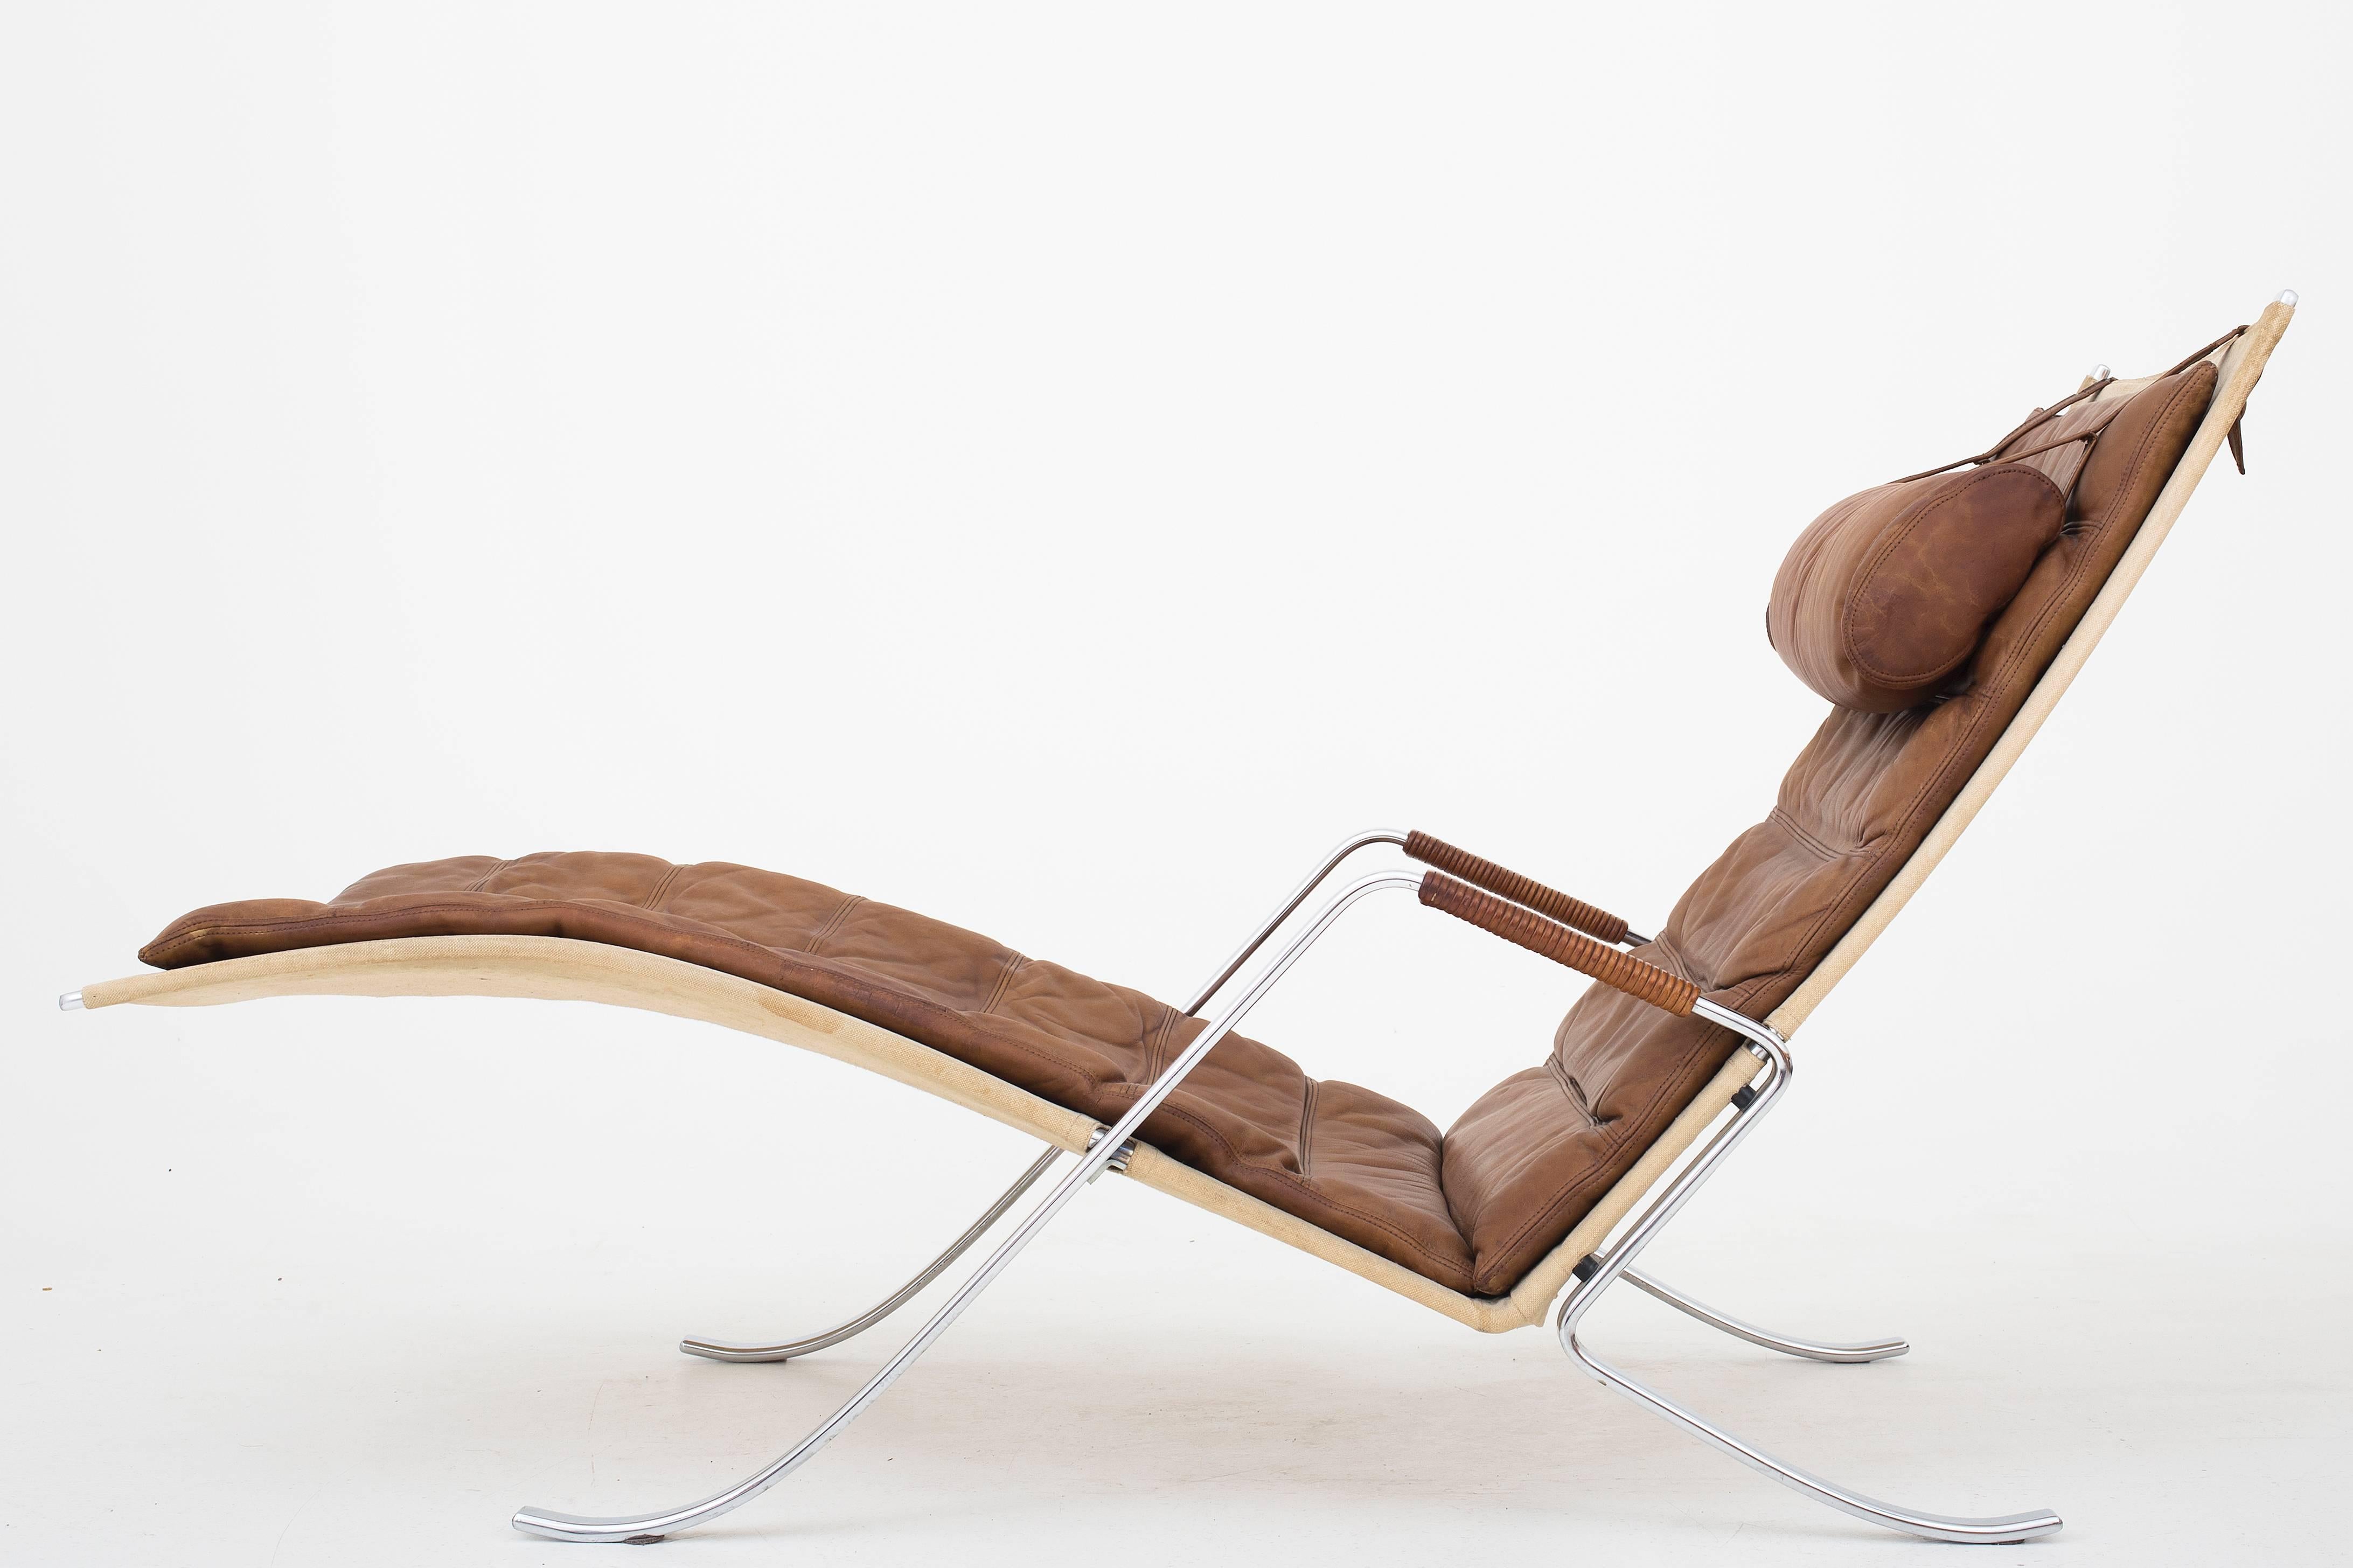 FK 87 Grasshopper chaiselong in canvas with loose cushion and neck in patinated brown leather, frame in chrome-plated steel. Design by Jørgen Kastholm & Preben Fabricius, 1968. Maker Alfred Kill, Germany.
     